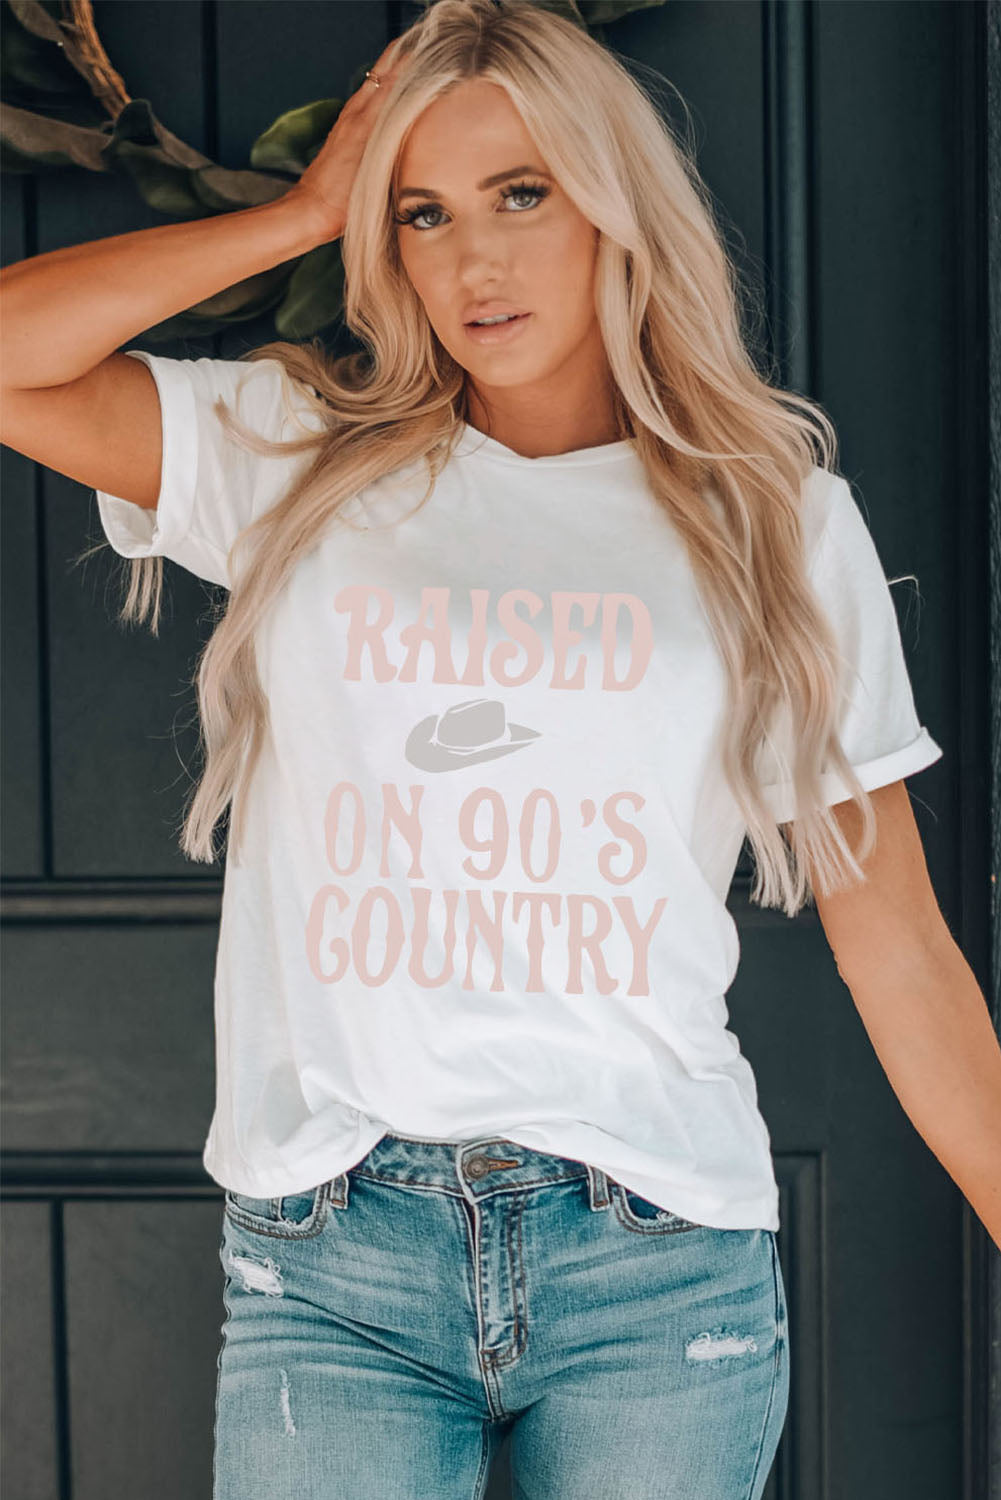 RAISED ON 90's COUNTRY Graphic Tee